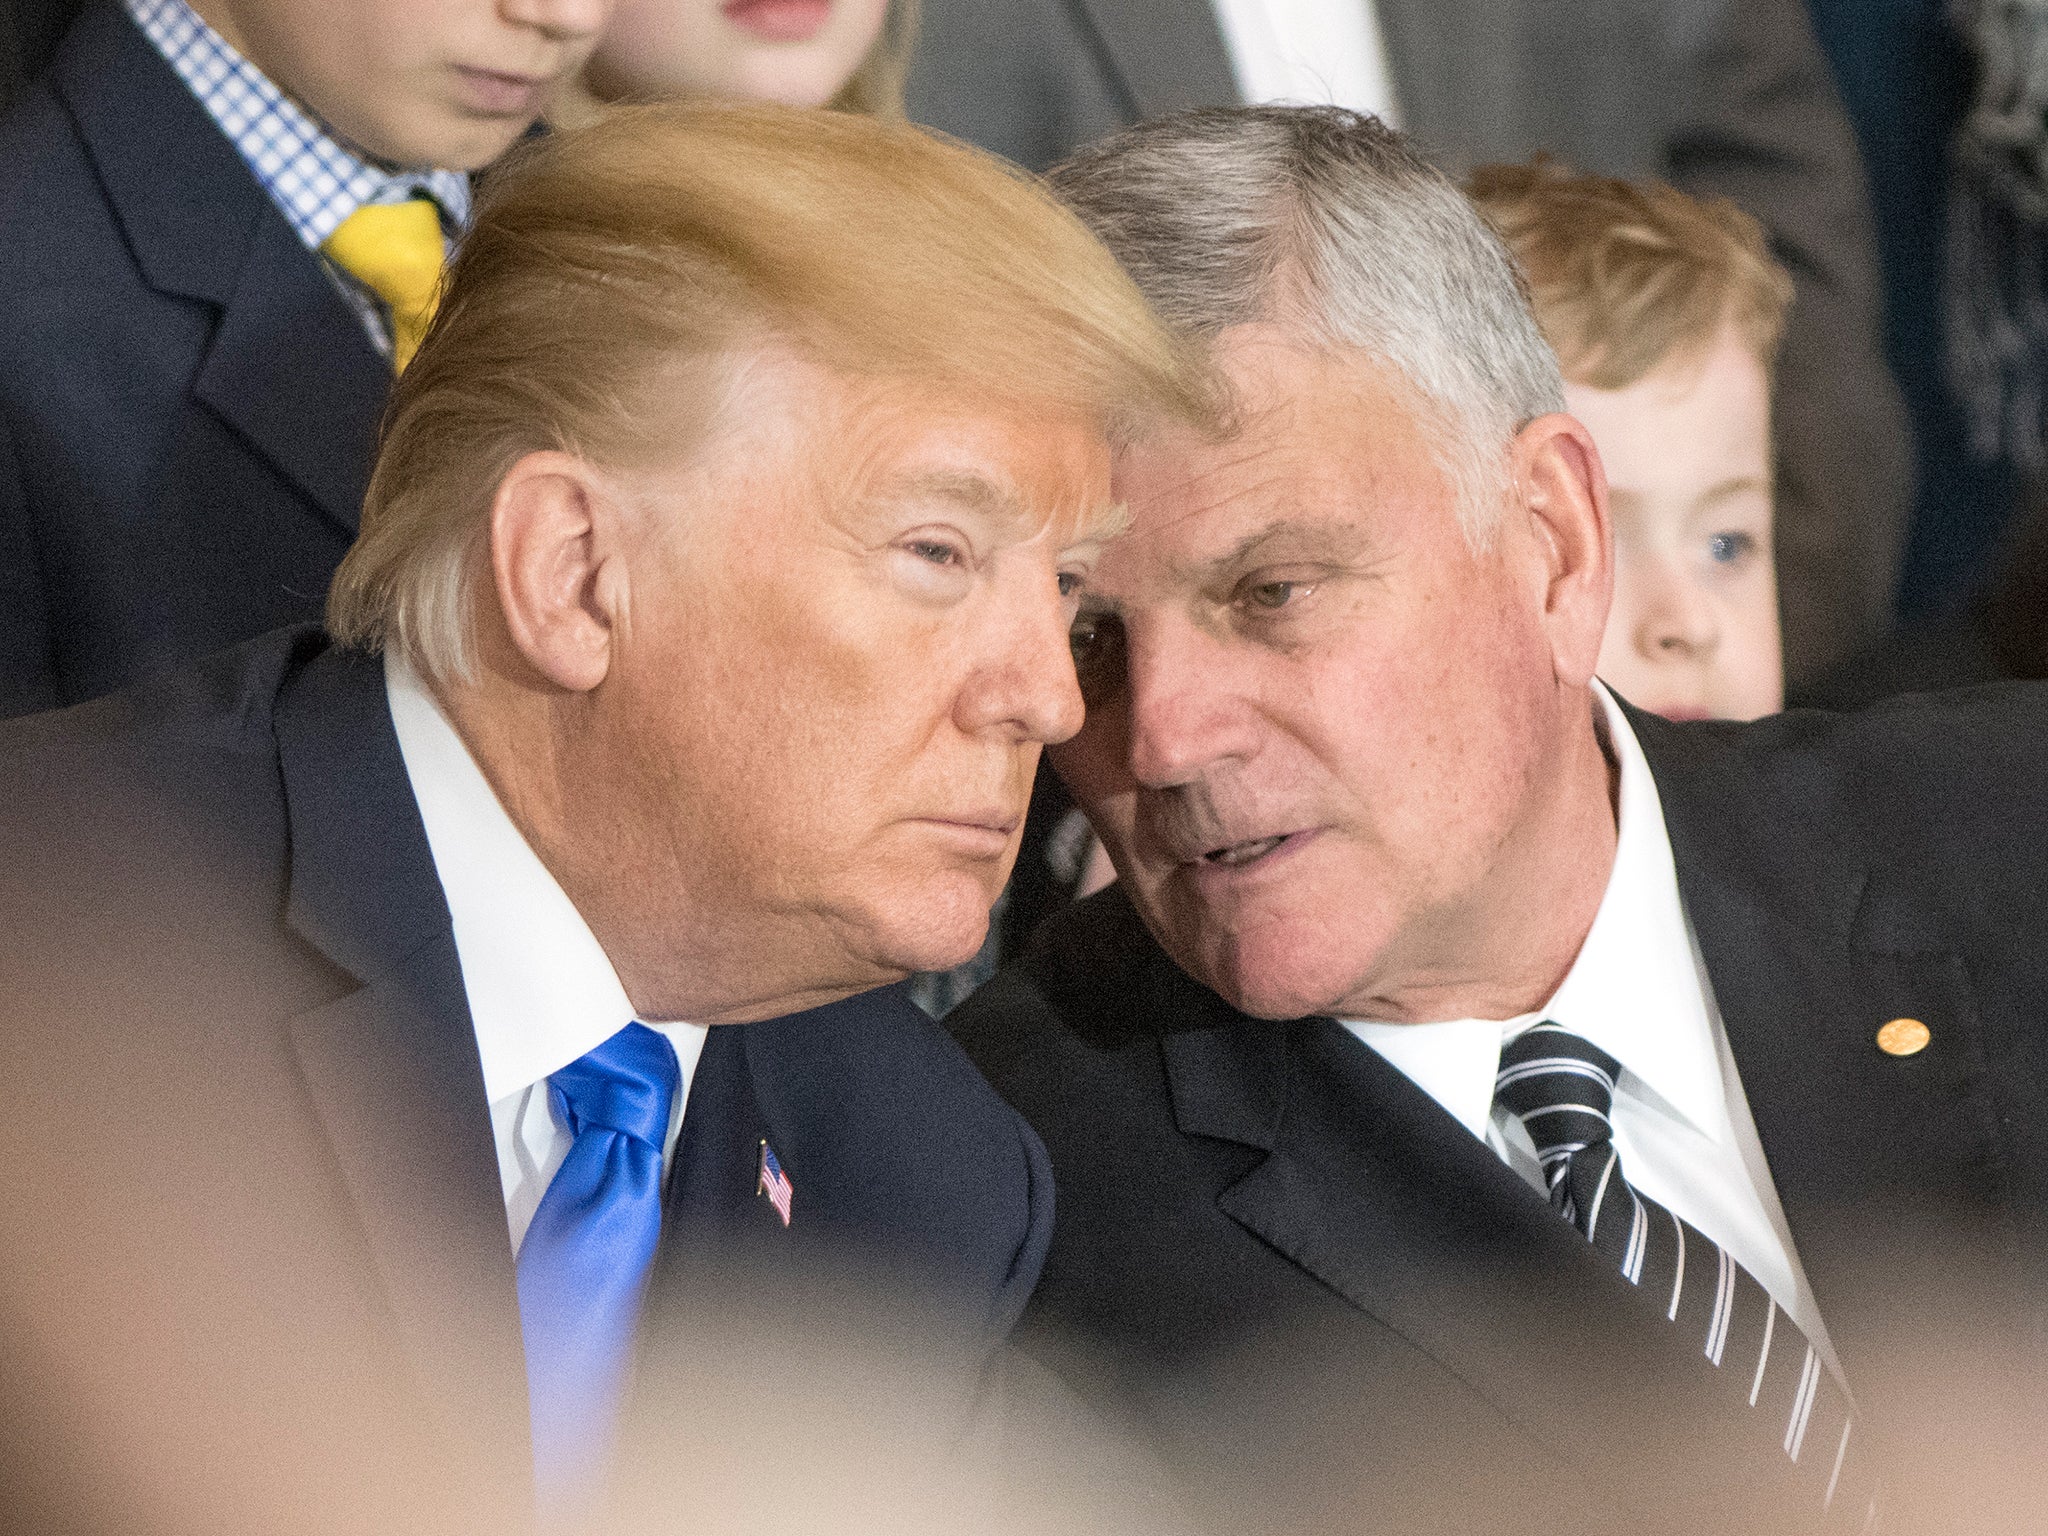 Franklin Graham (R) talks with Donald Trump in February 2018